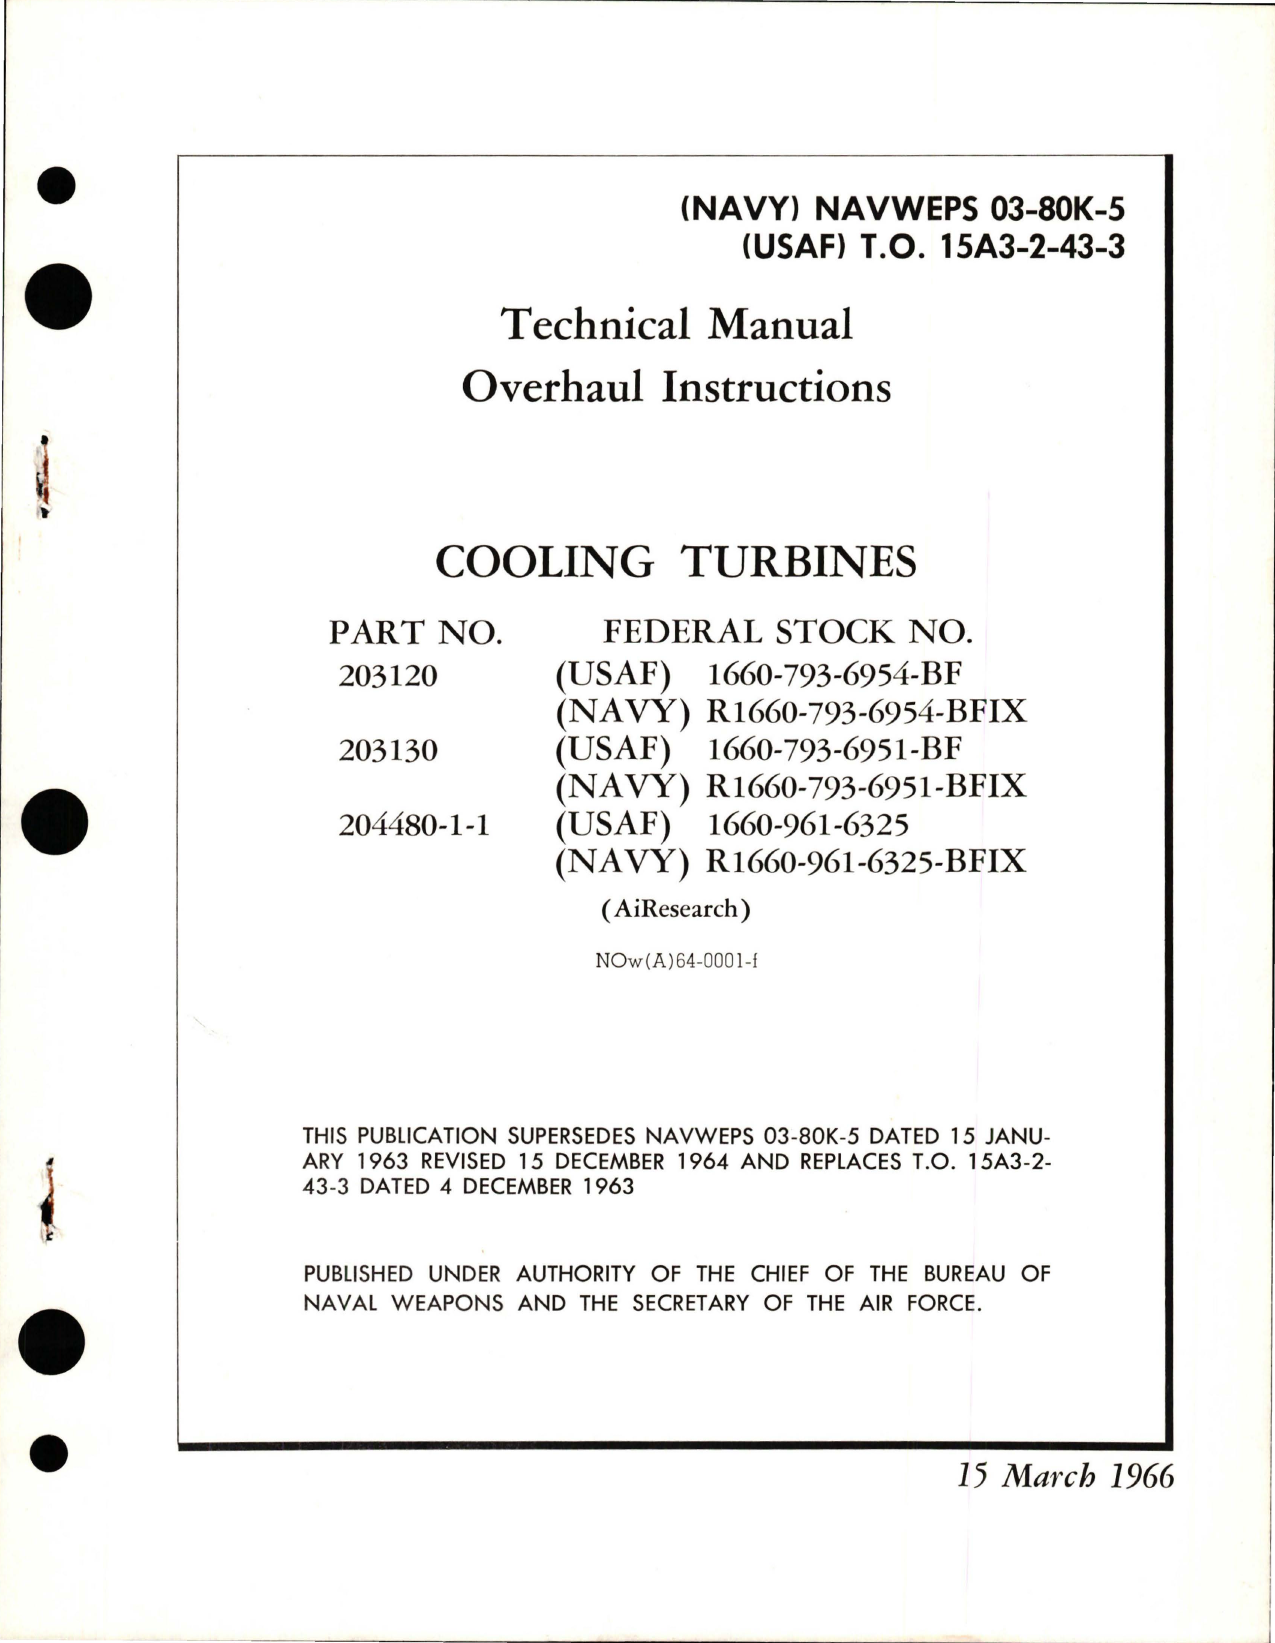 Sample page 1 from AirCorps Library document: Overhaul Instructions for Cooling Turbines - Parts 203120, 203130, and 204480-1-1